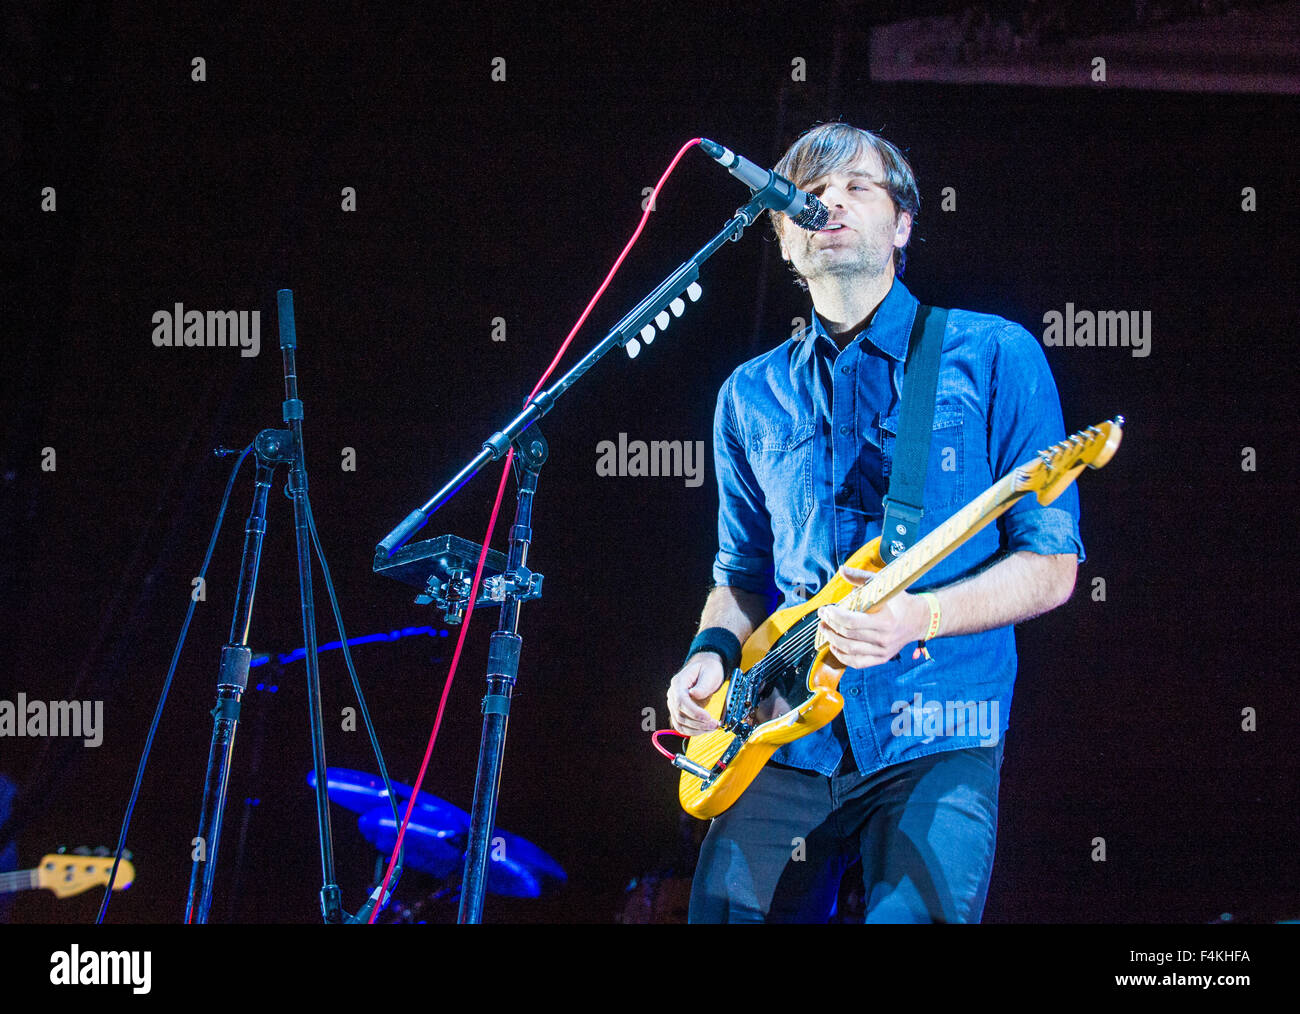 Musician Ben Gibbard of Death Cab for Cutie performs on stage during Life Is Beautiful Festival in Las Vegas Stock Photo